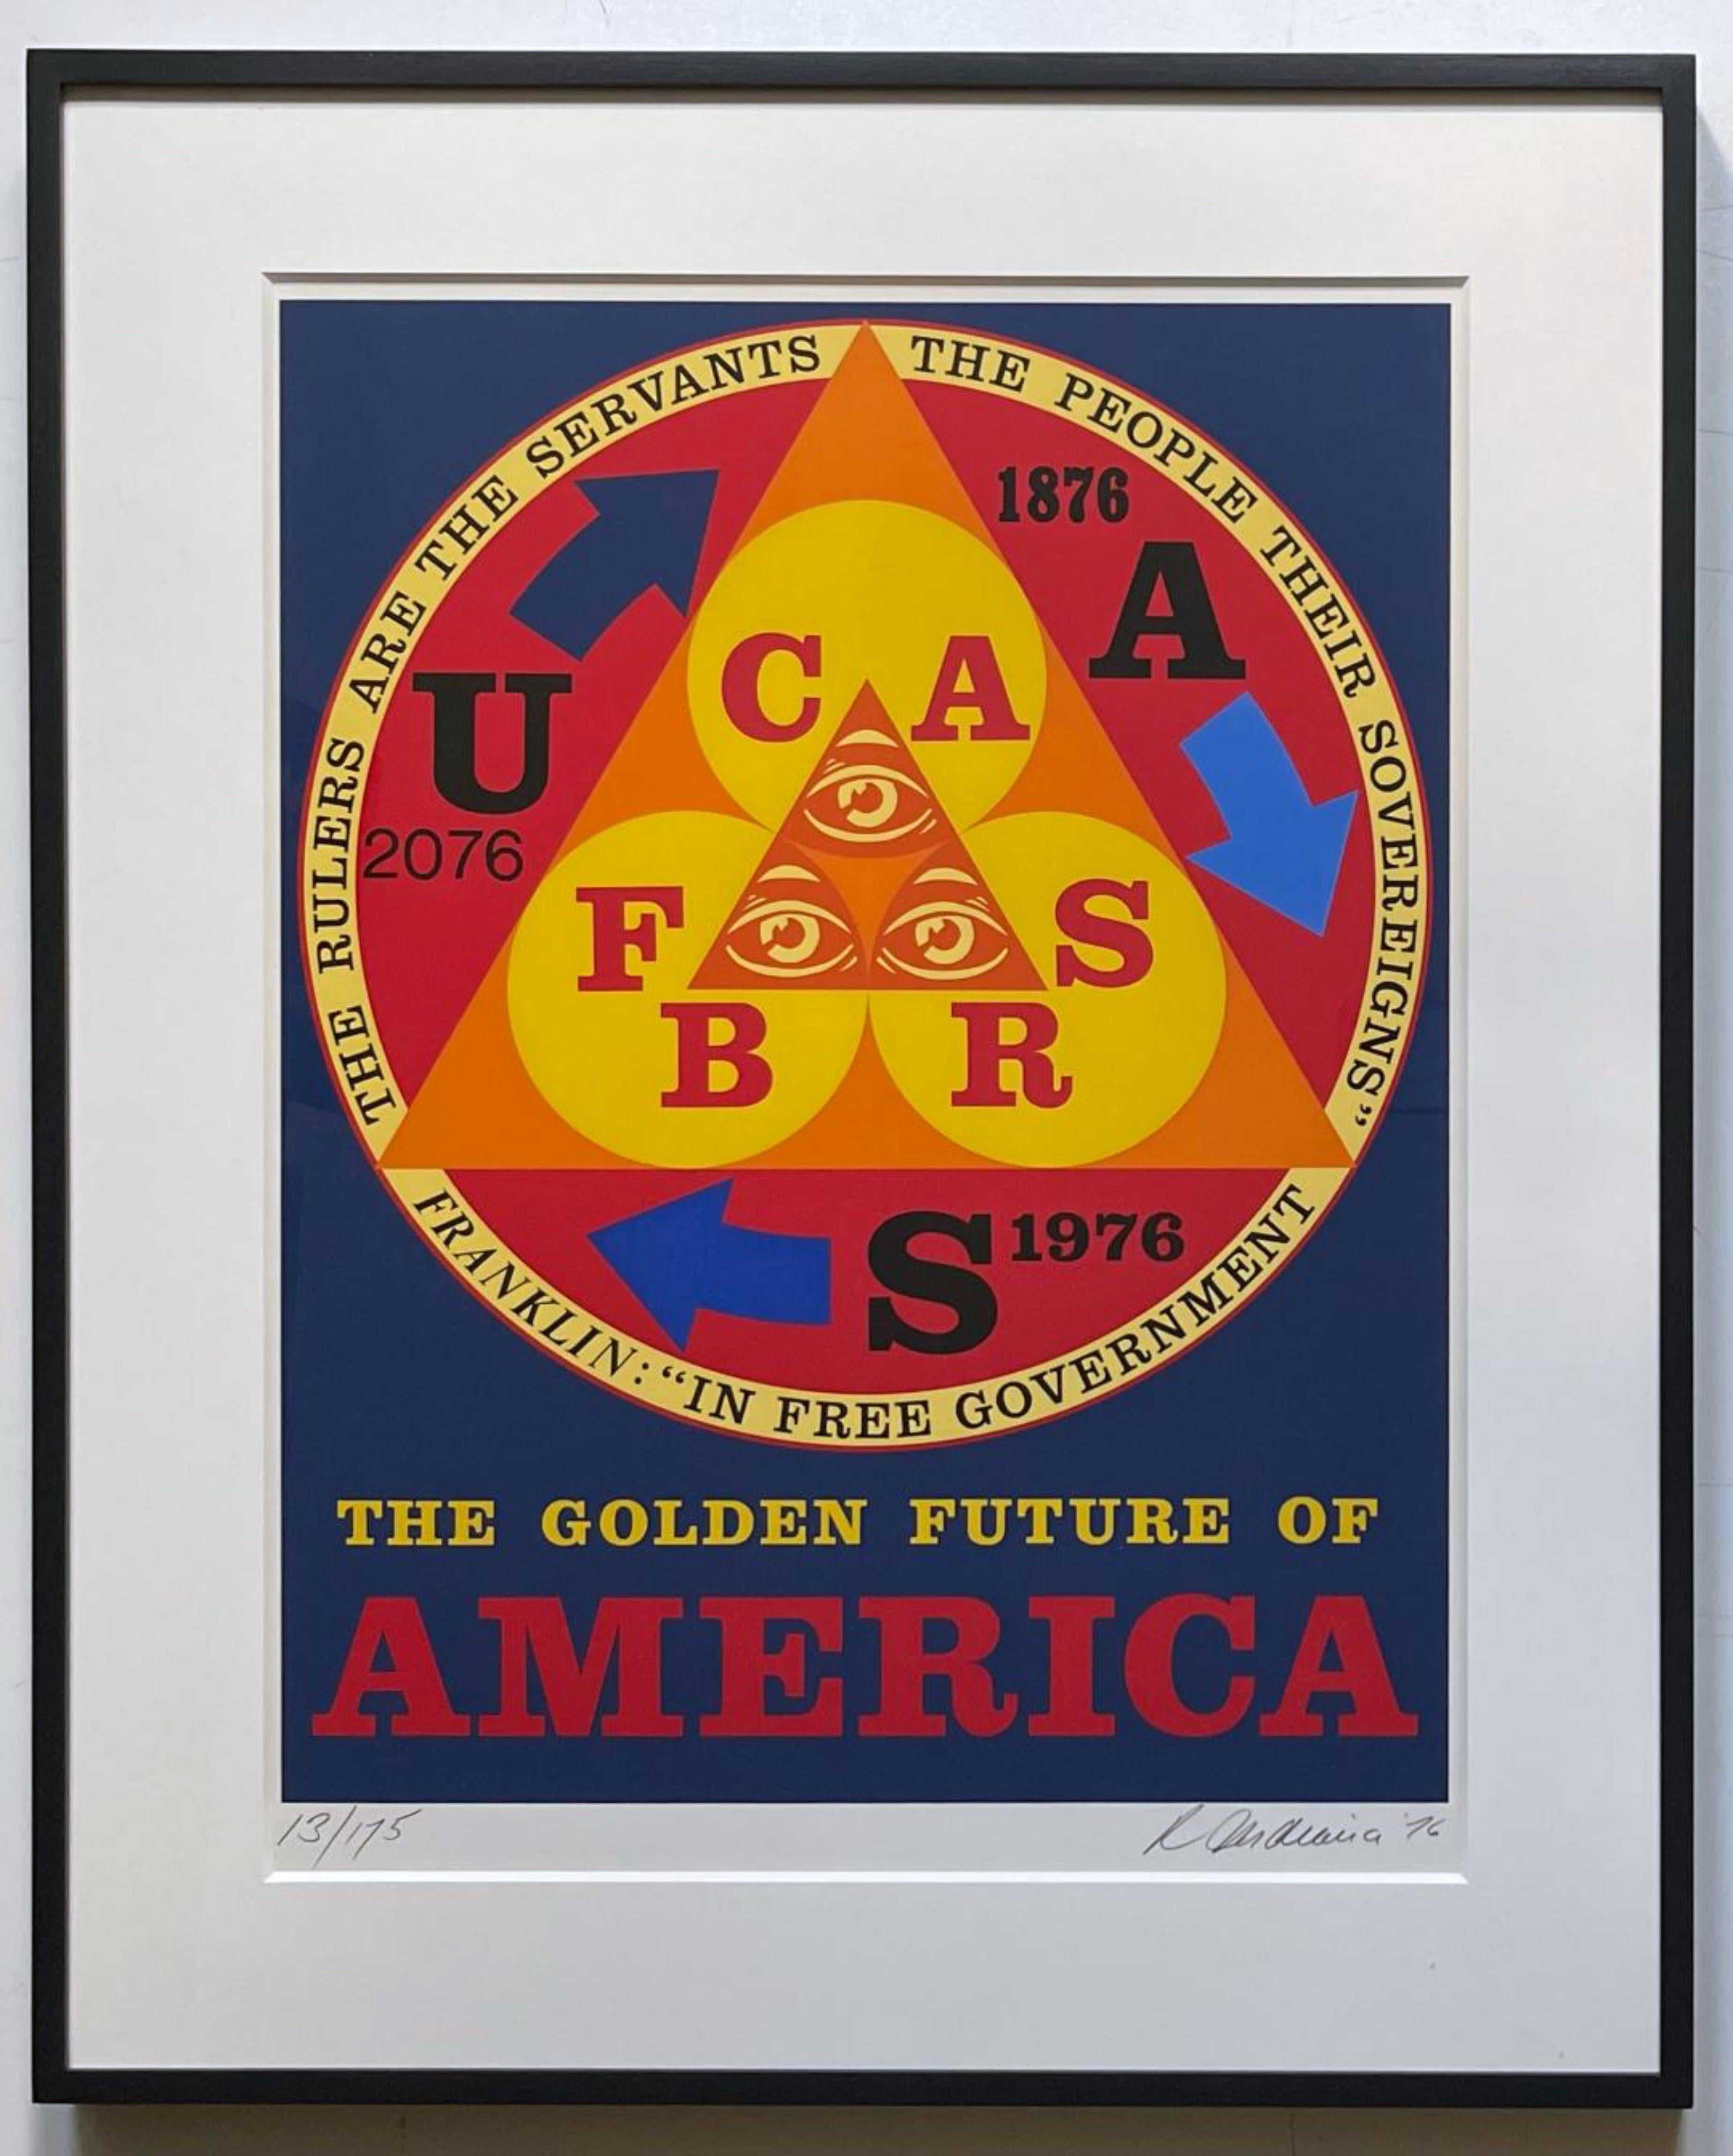 The Golden Future of America (Sheehan, 92) - Print by Robert Indiana